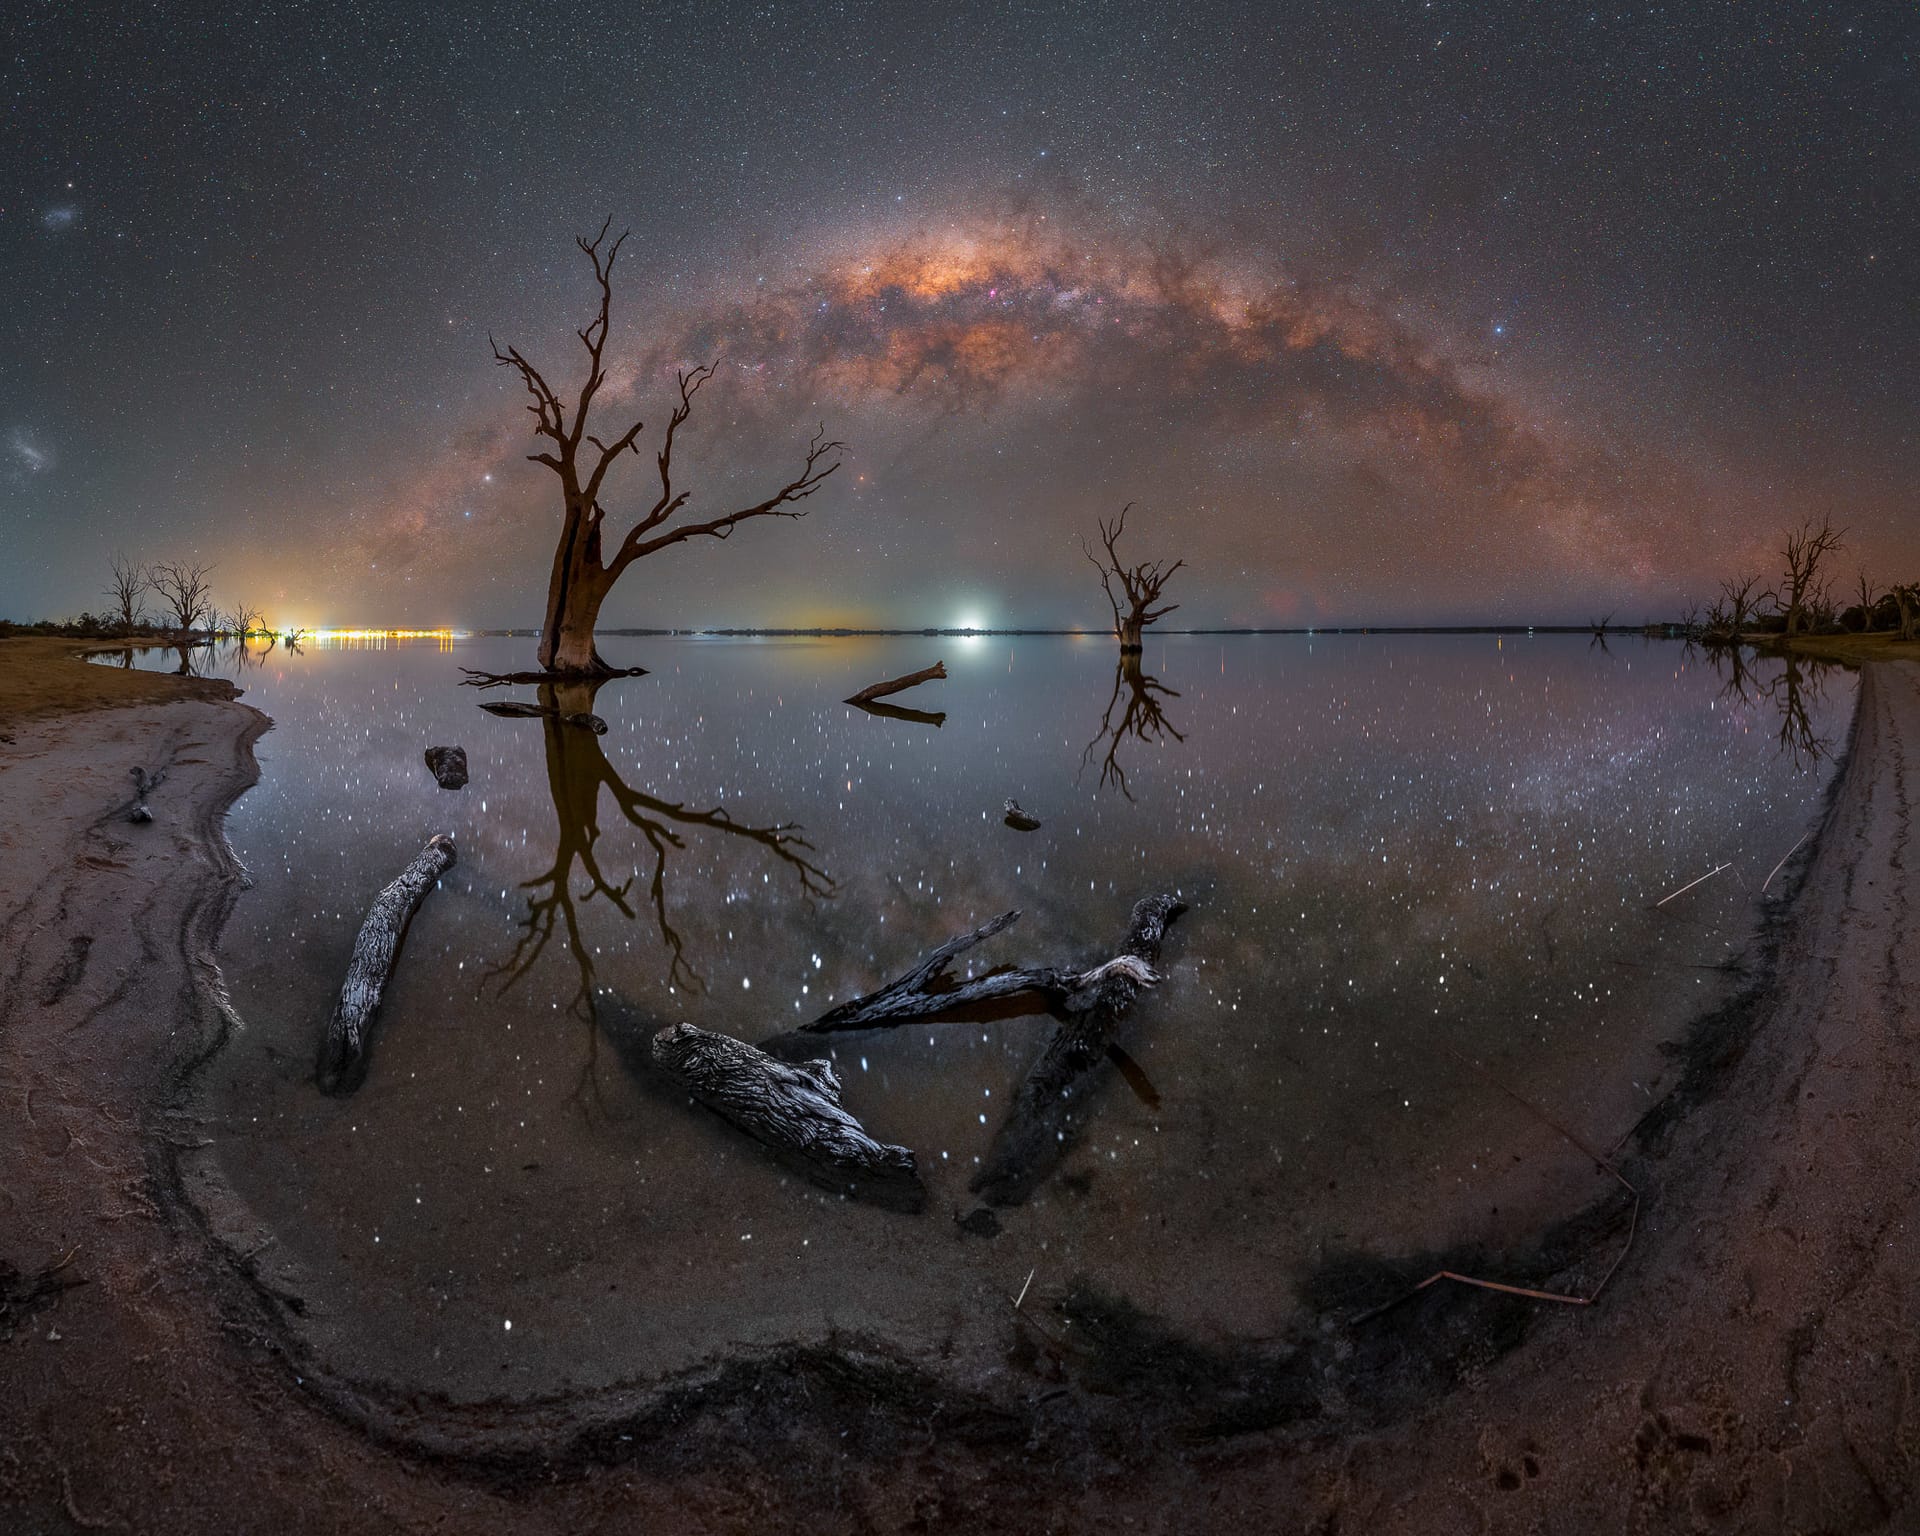 Milky Way photographer of the year South Australia